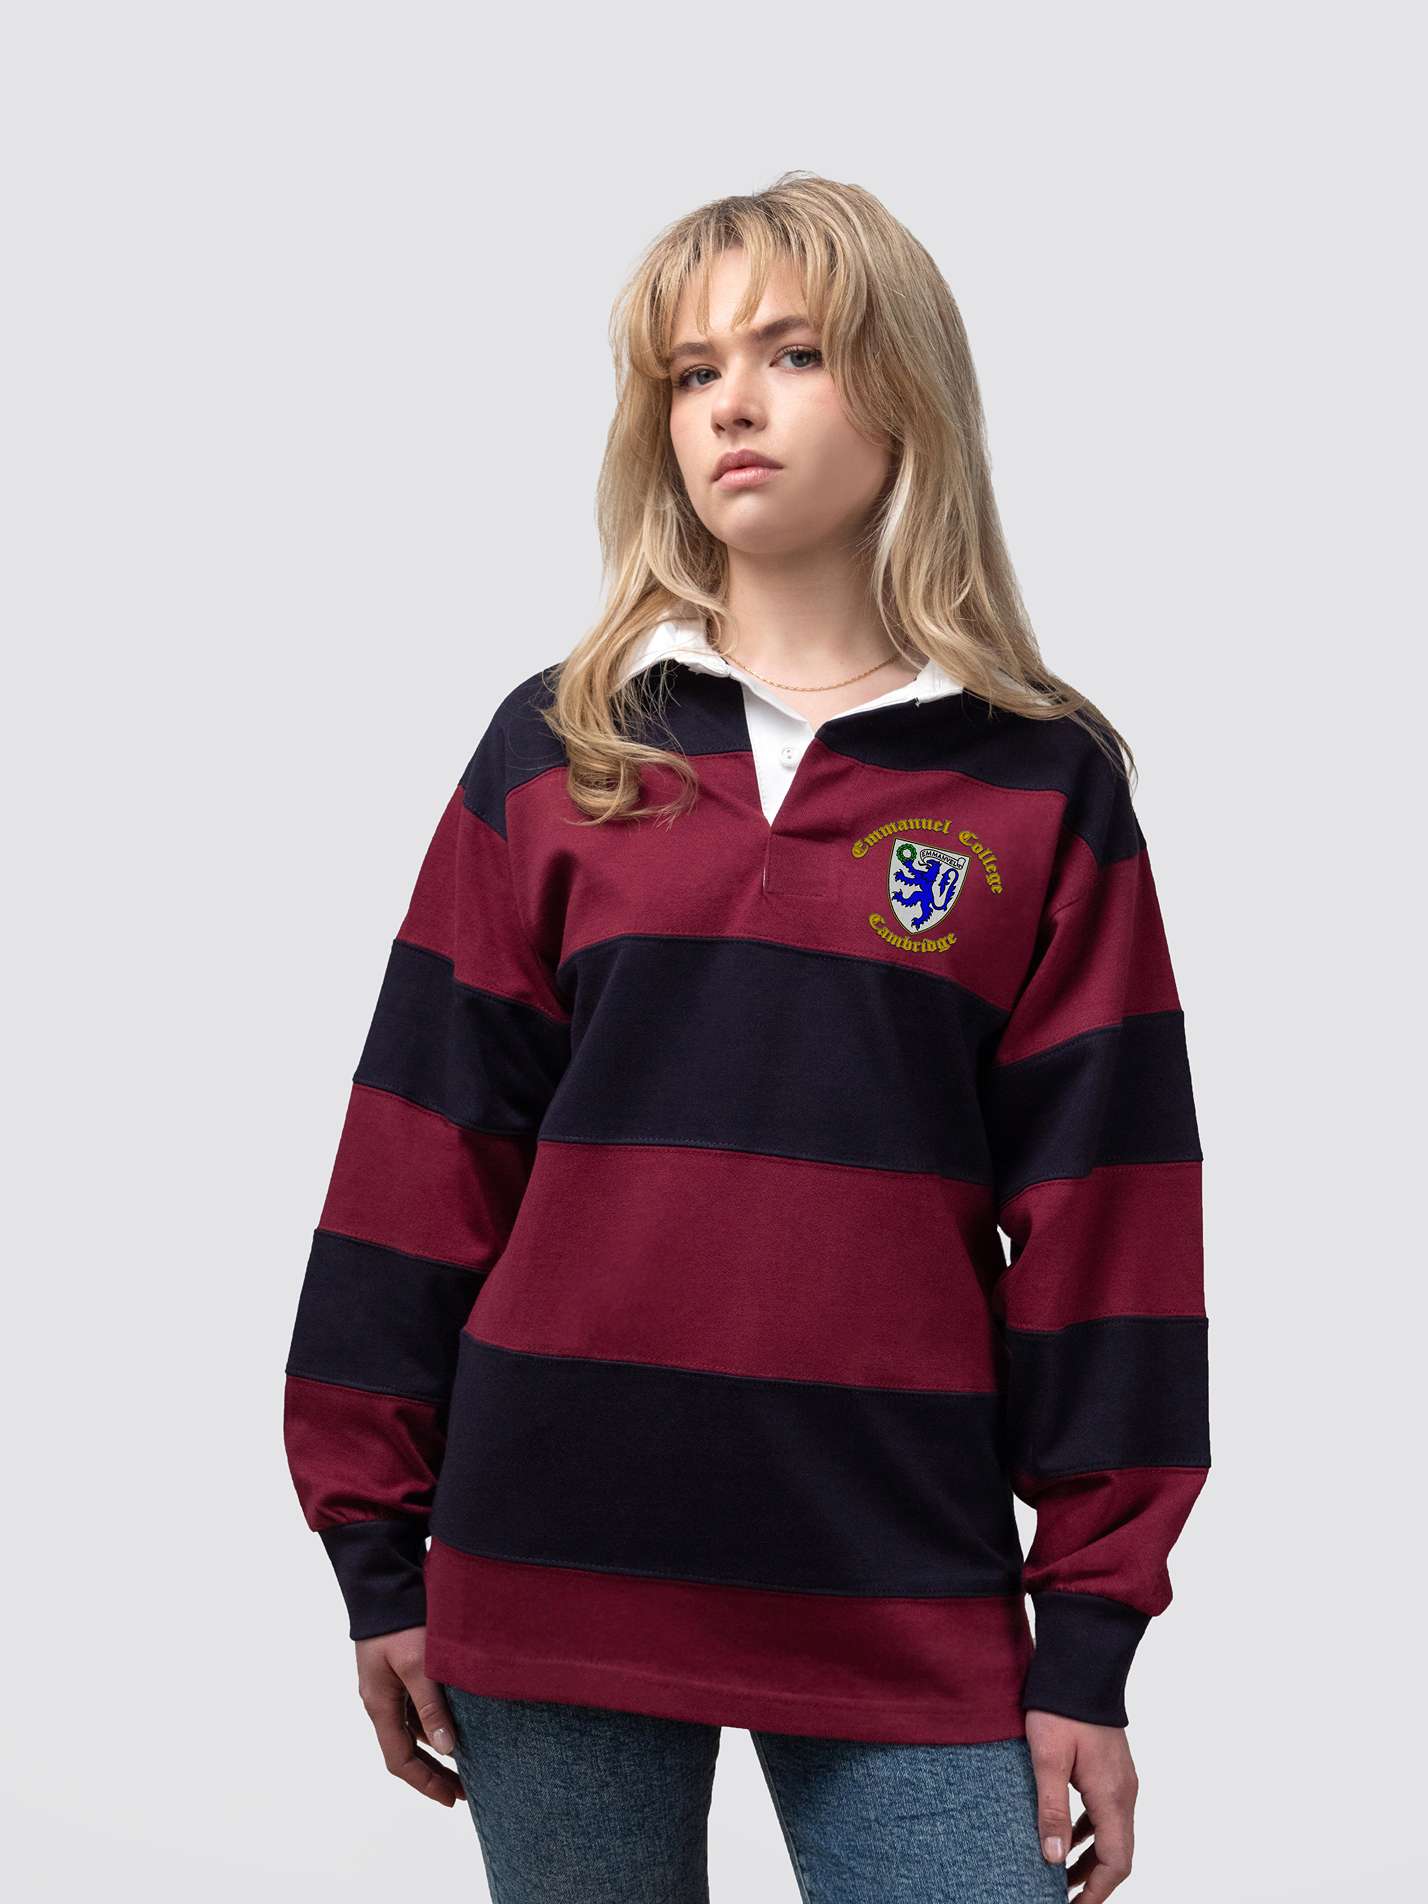 Emmanuel College rugby shirt, with burgundy and navy stripes